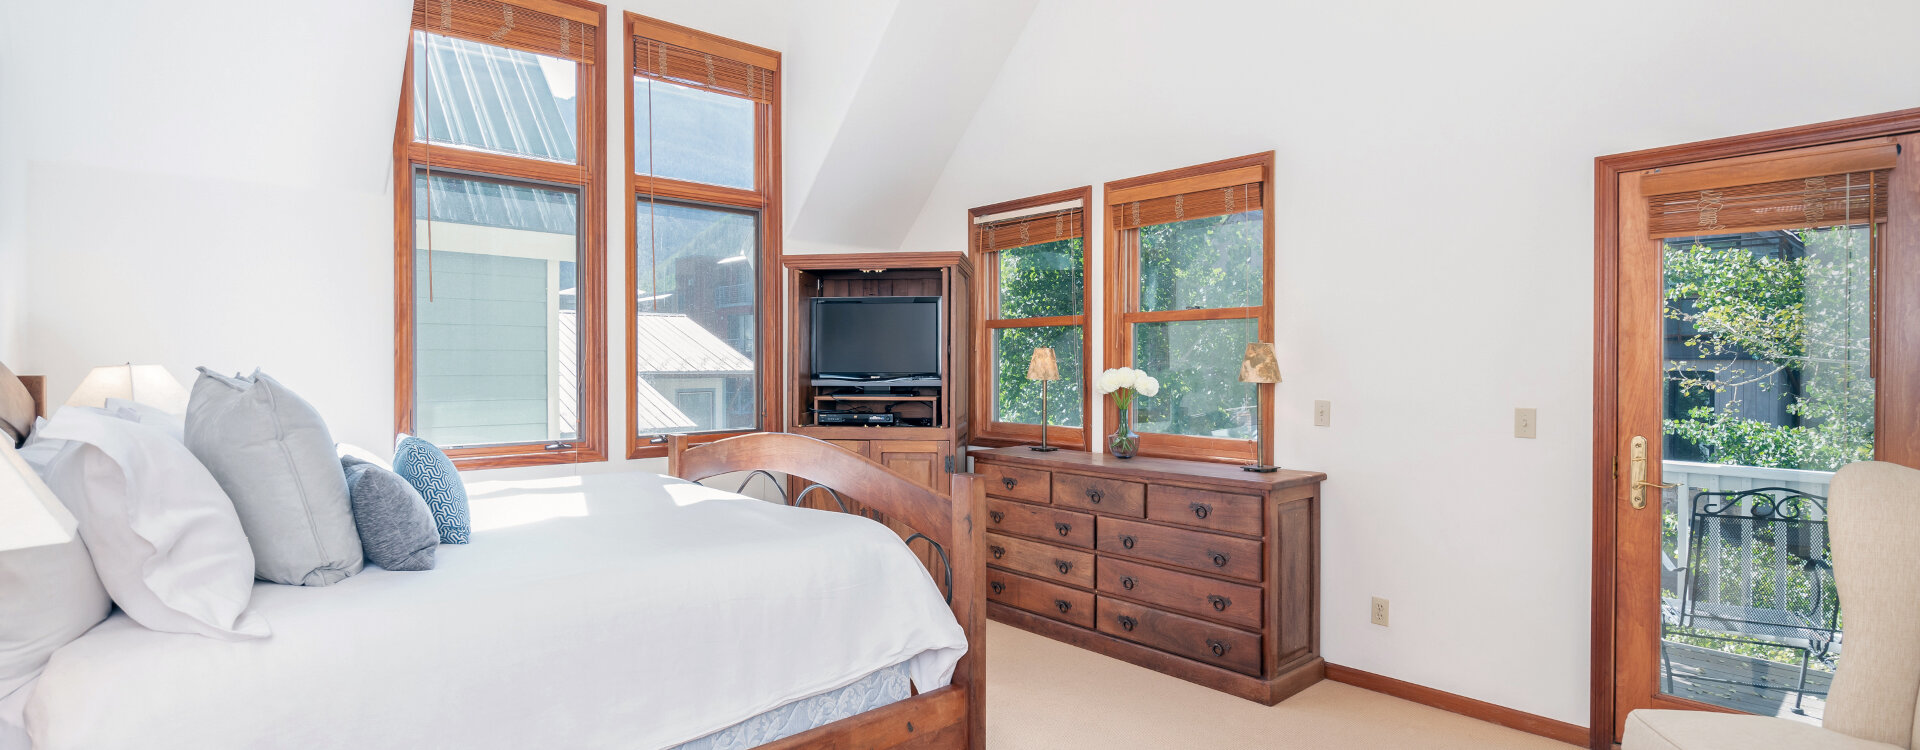 3.01-telluride-south-pacific-new-master-bedroom-web